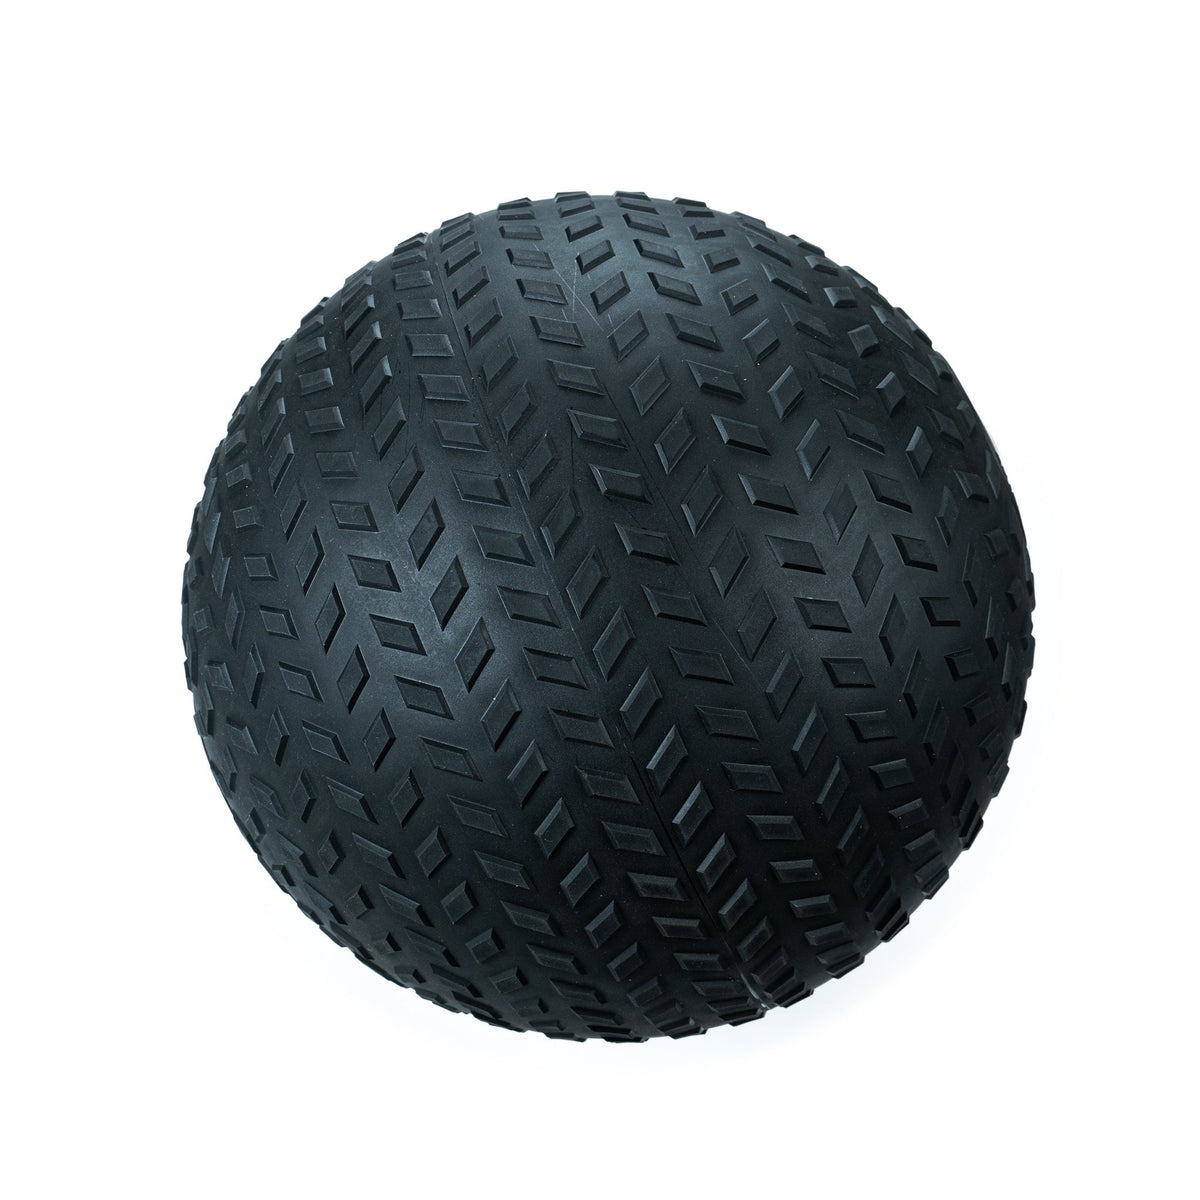 FitWay Equip. Max Grip Slam Ball - 30 Lbs